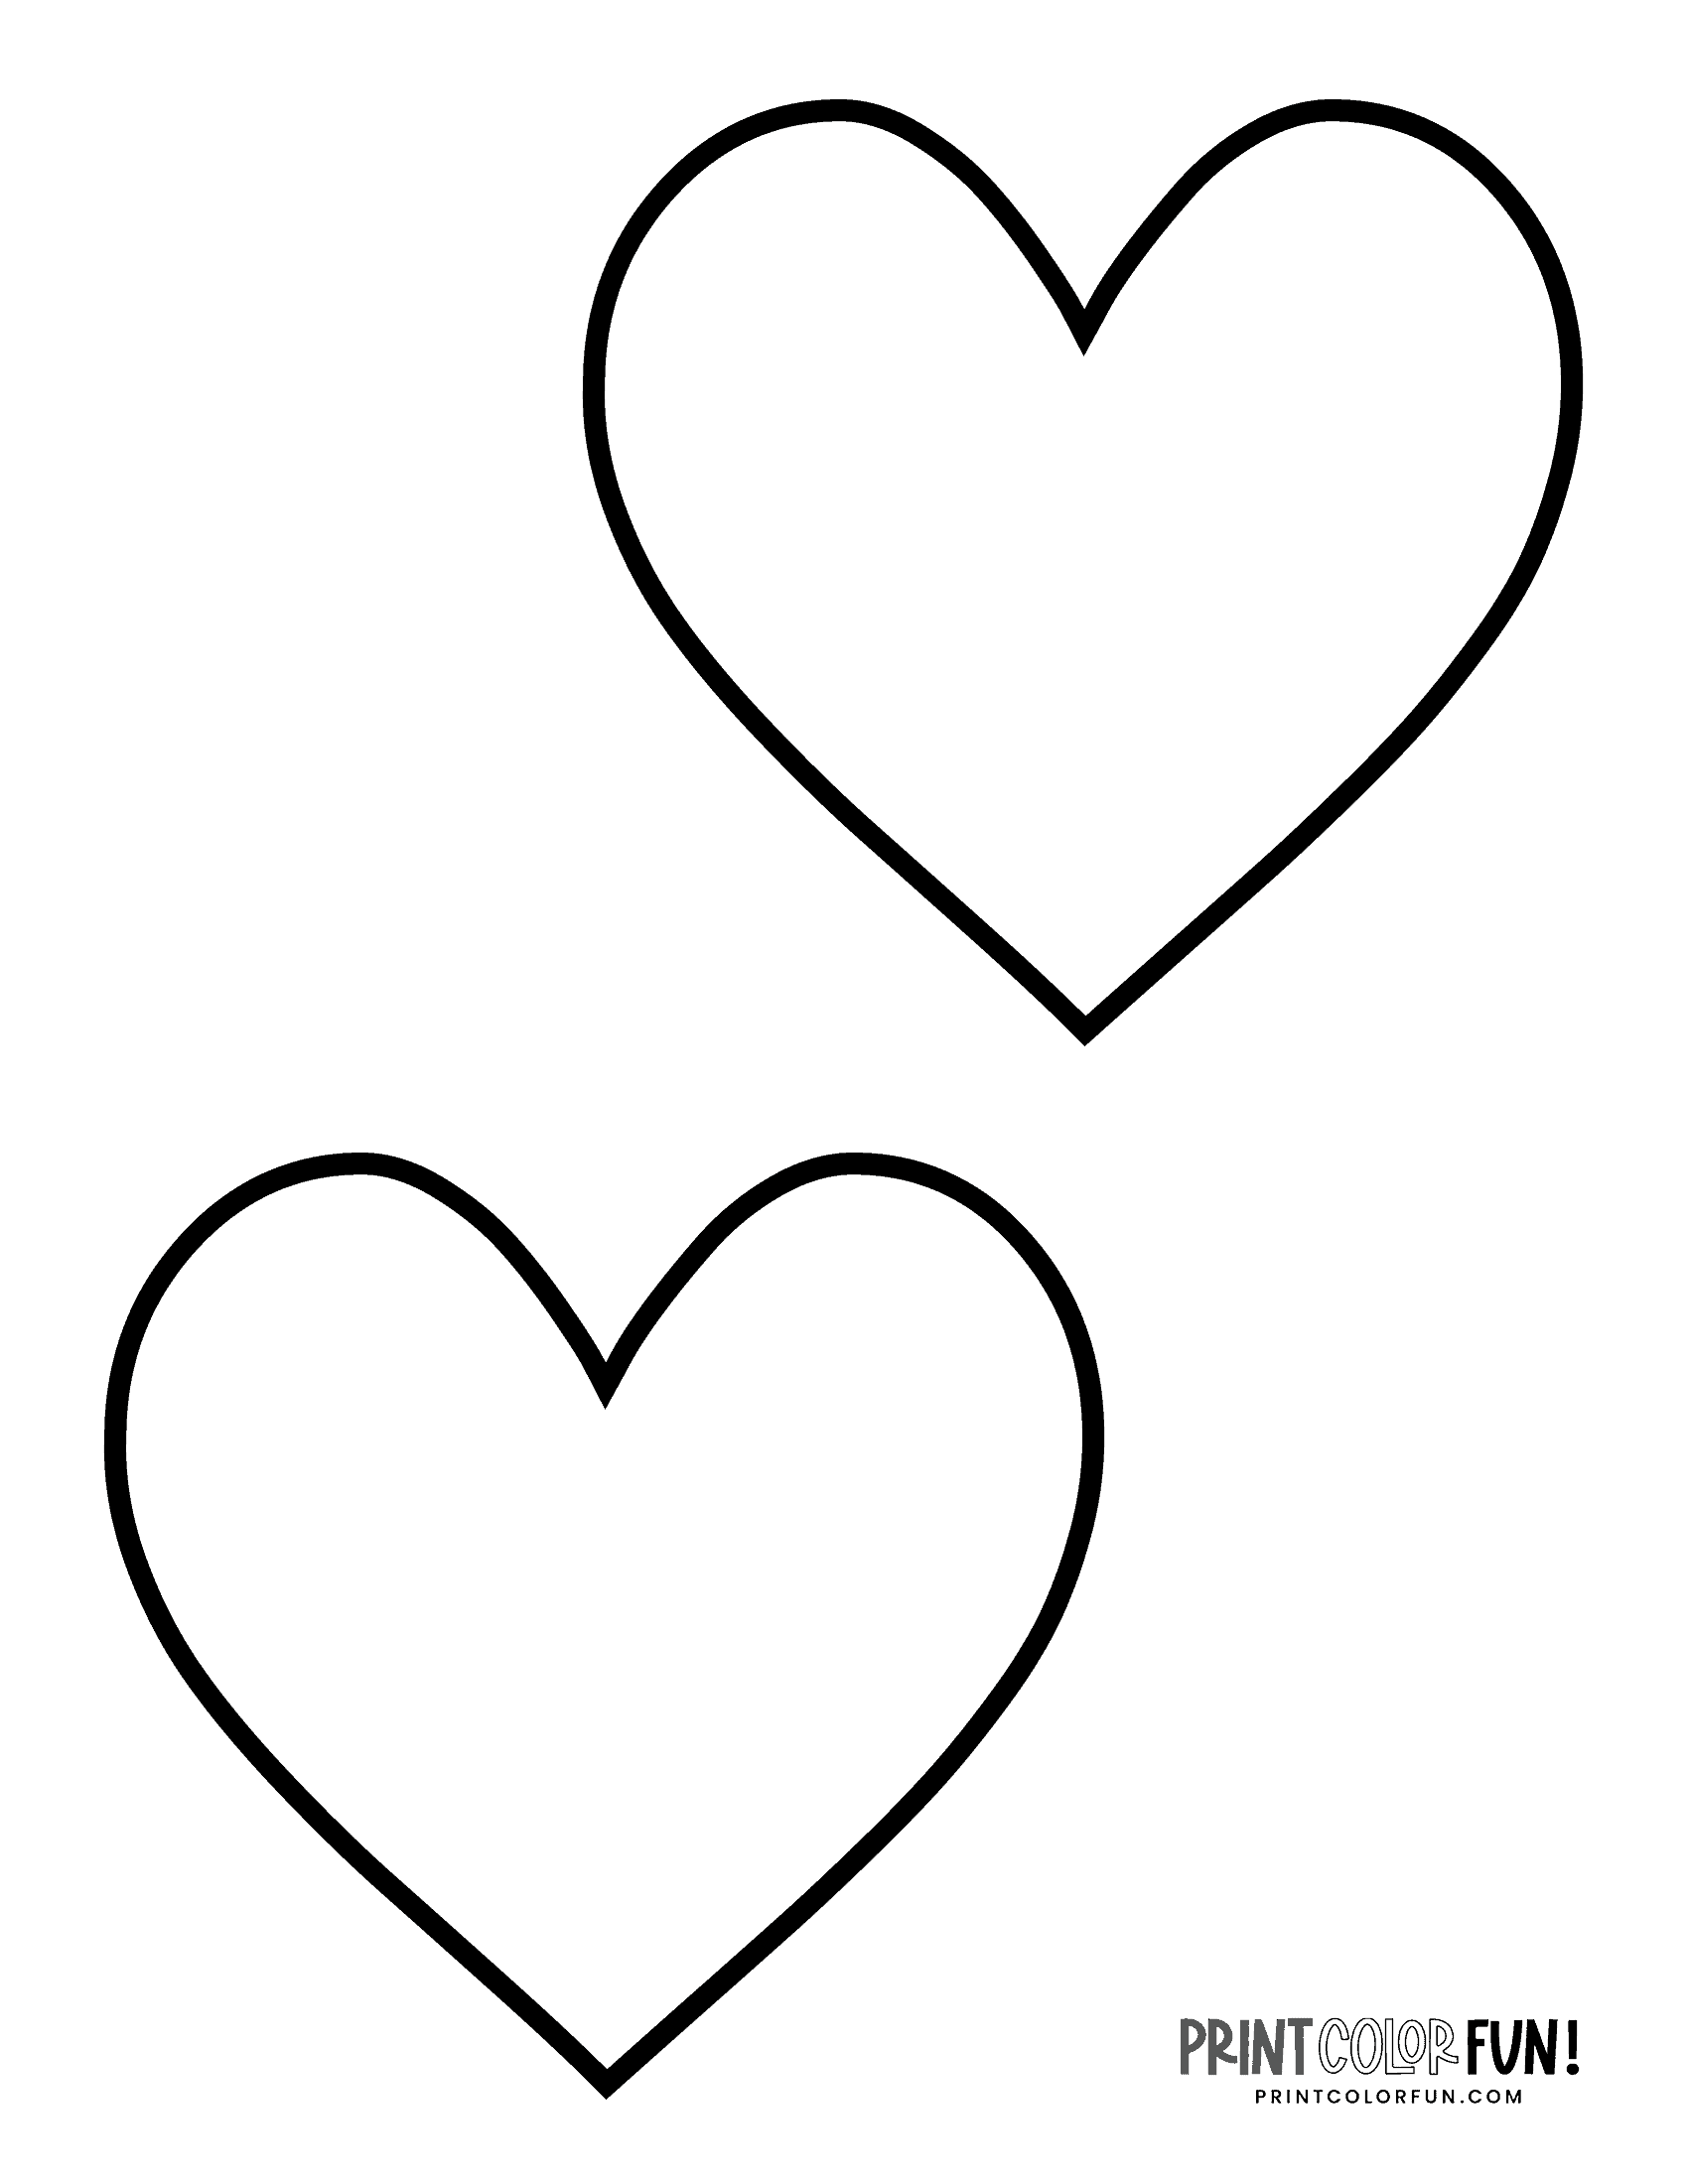 Blank heart shape coloring pages & crafty printables Print Color Fun!